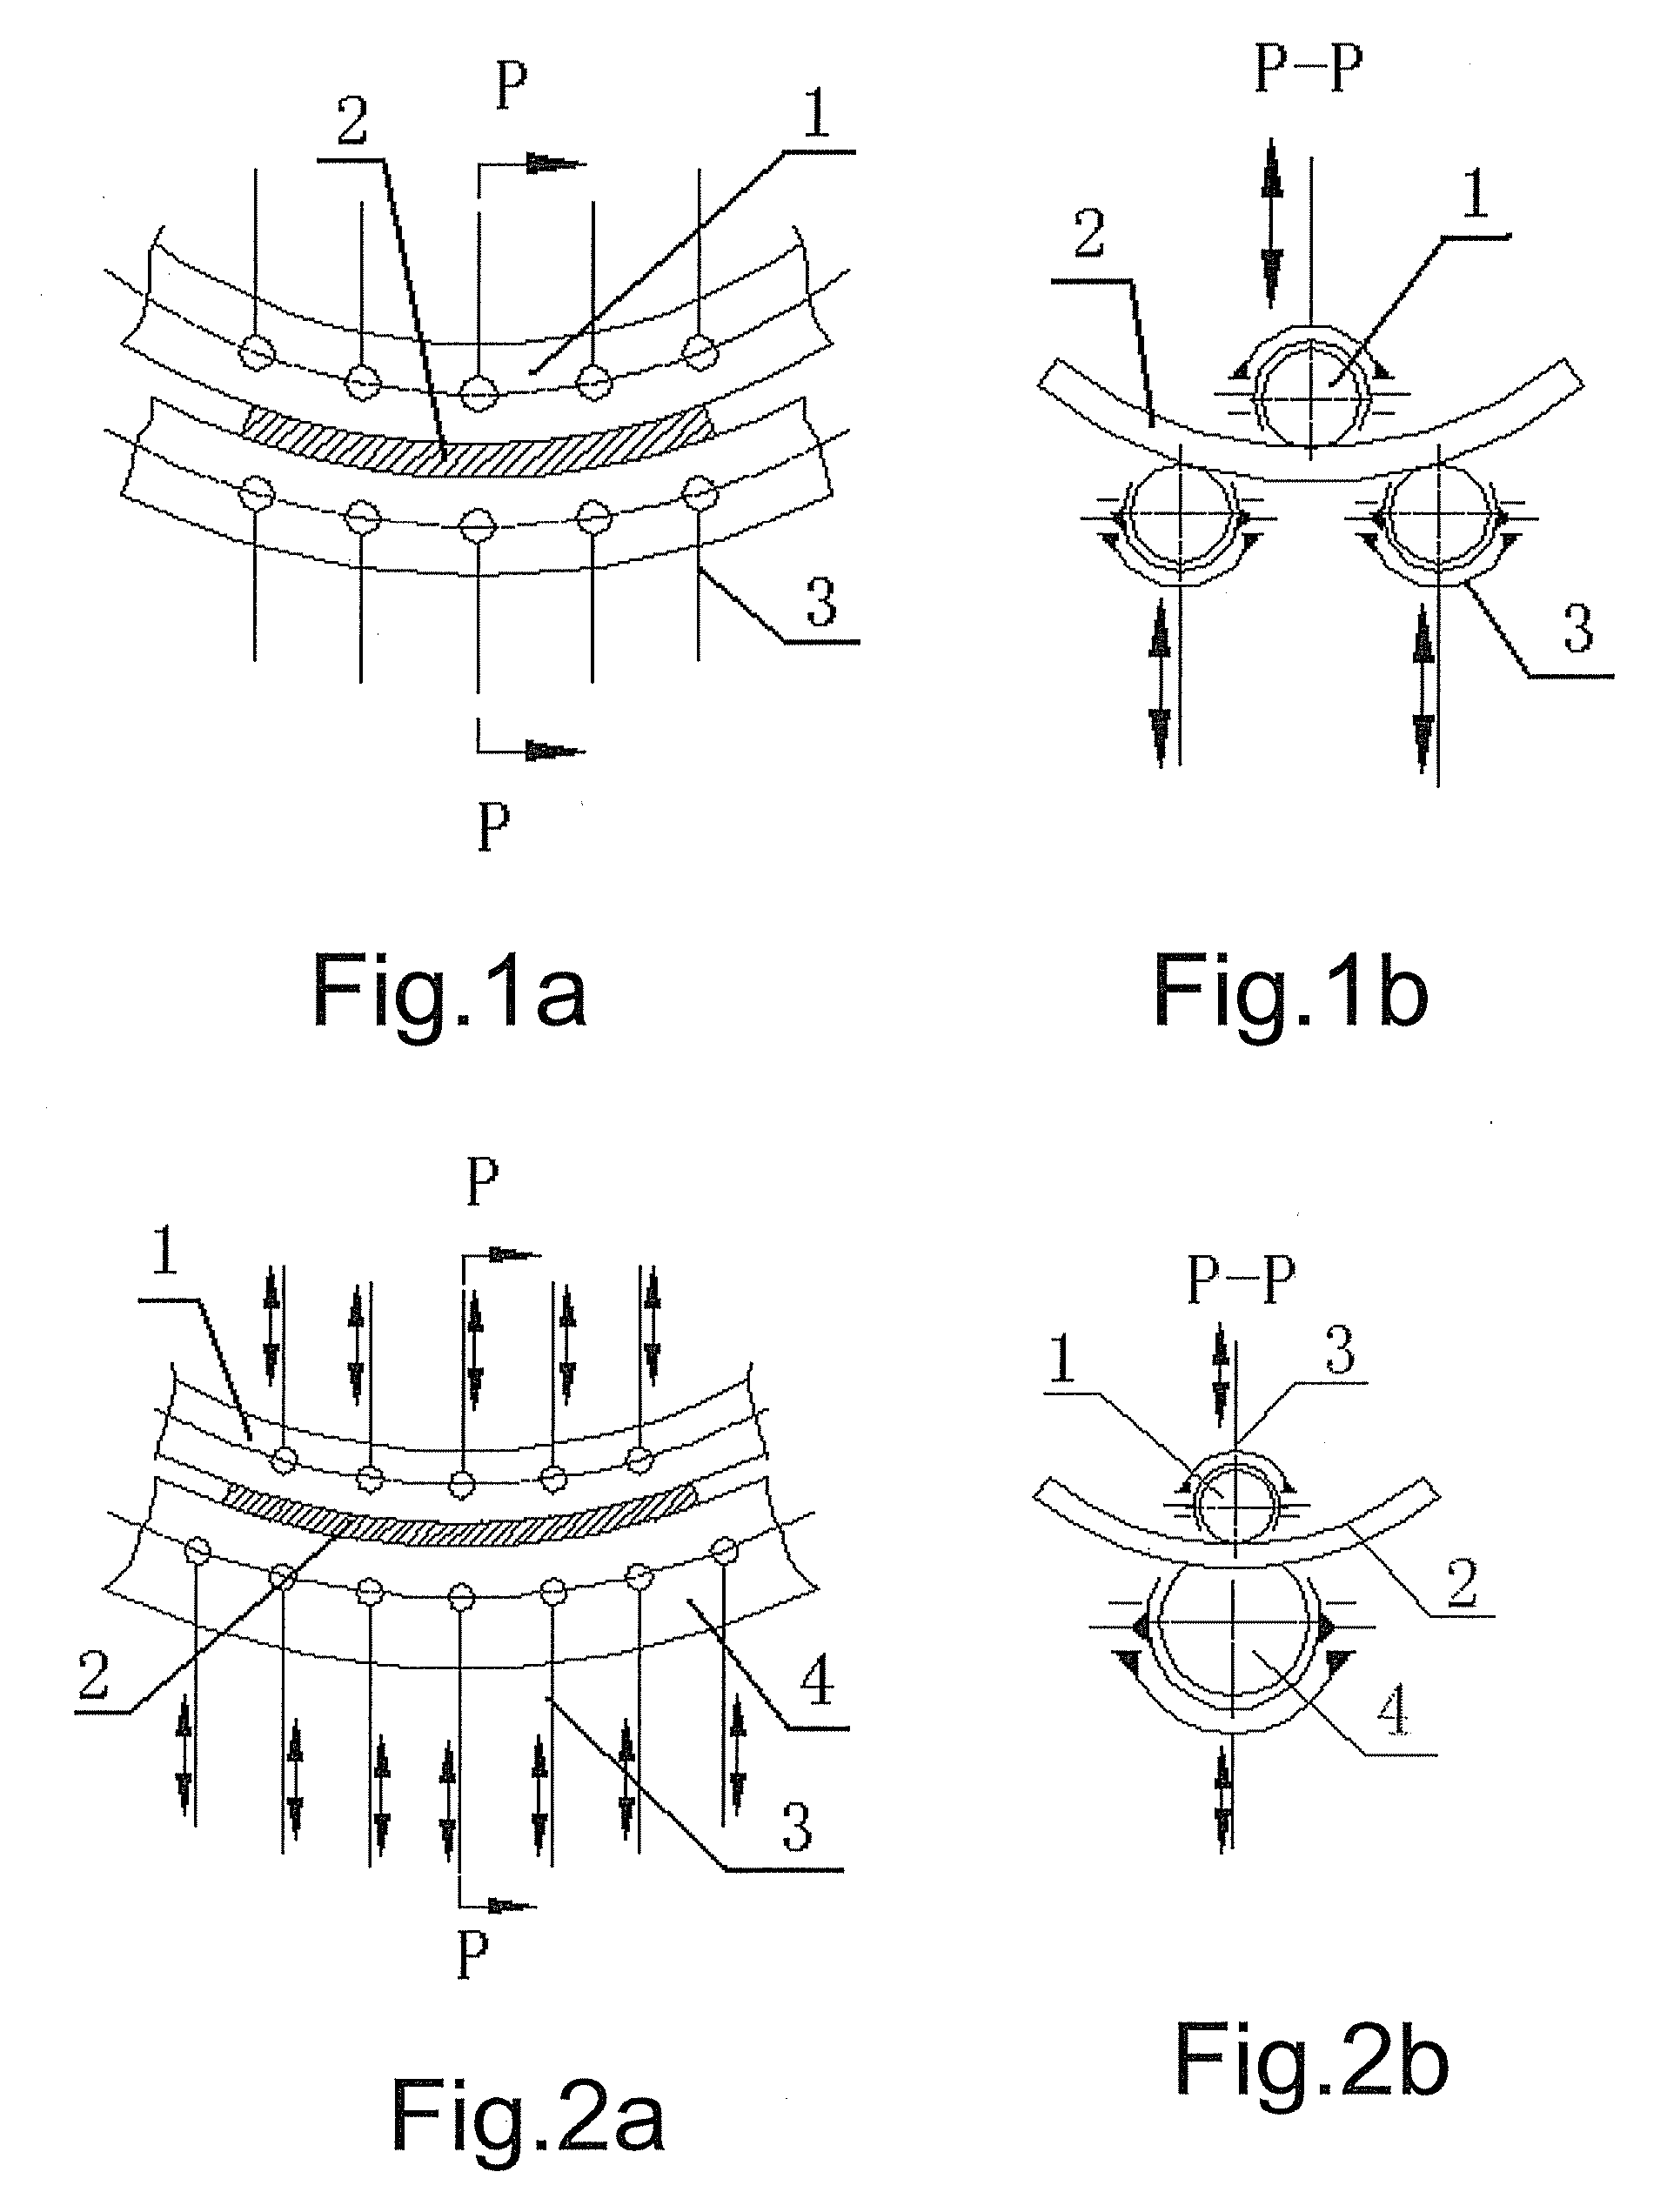 Flexible forming device for forming three-dimensional shaped workpieces